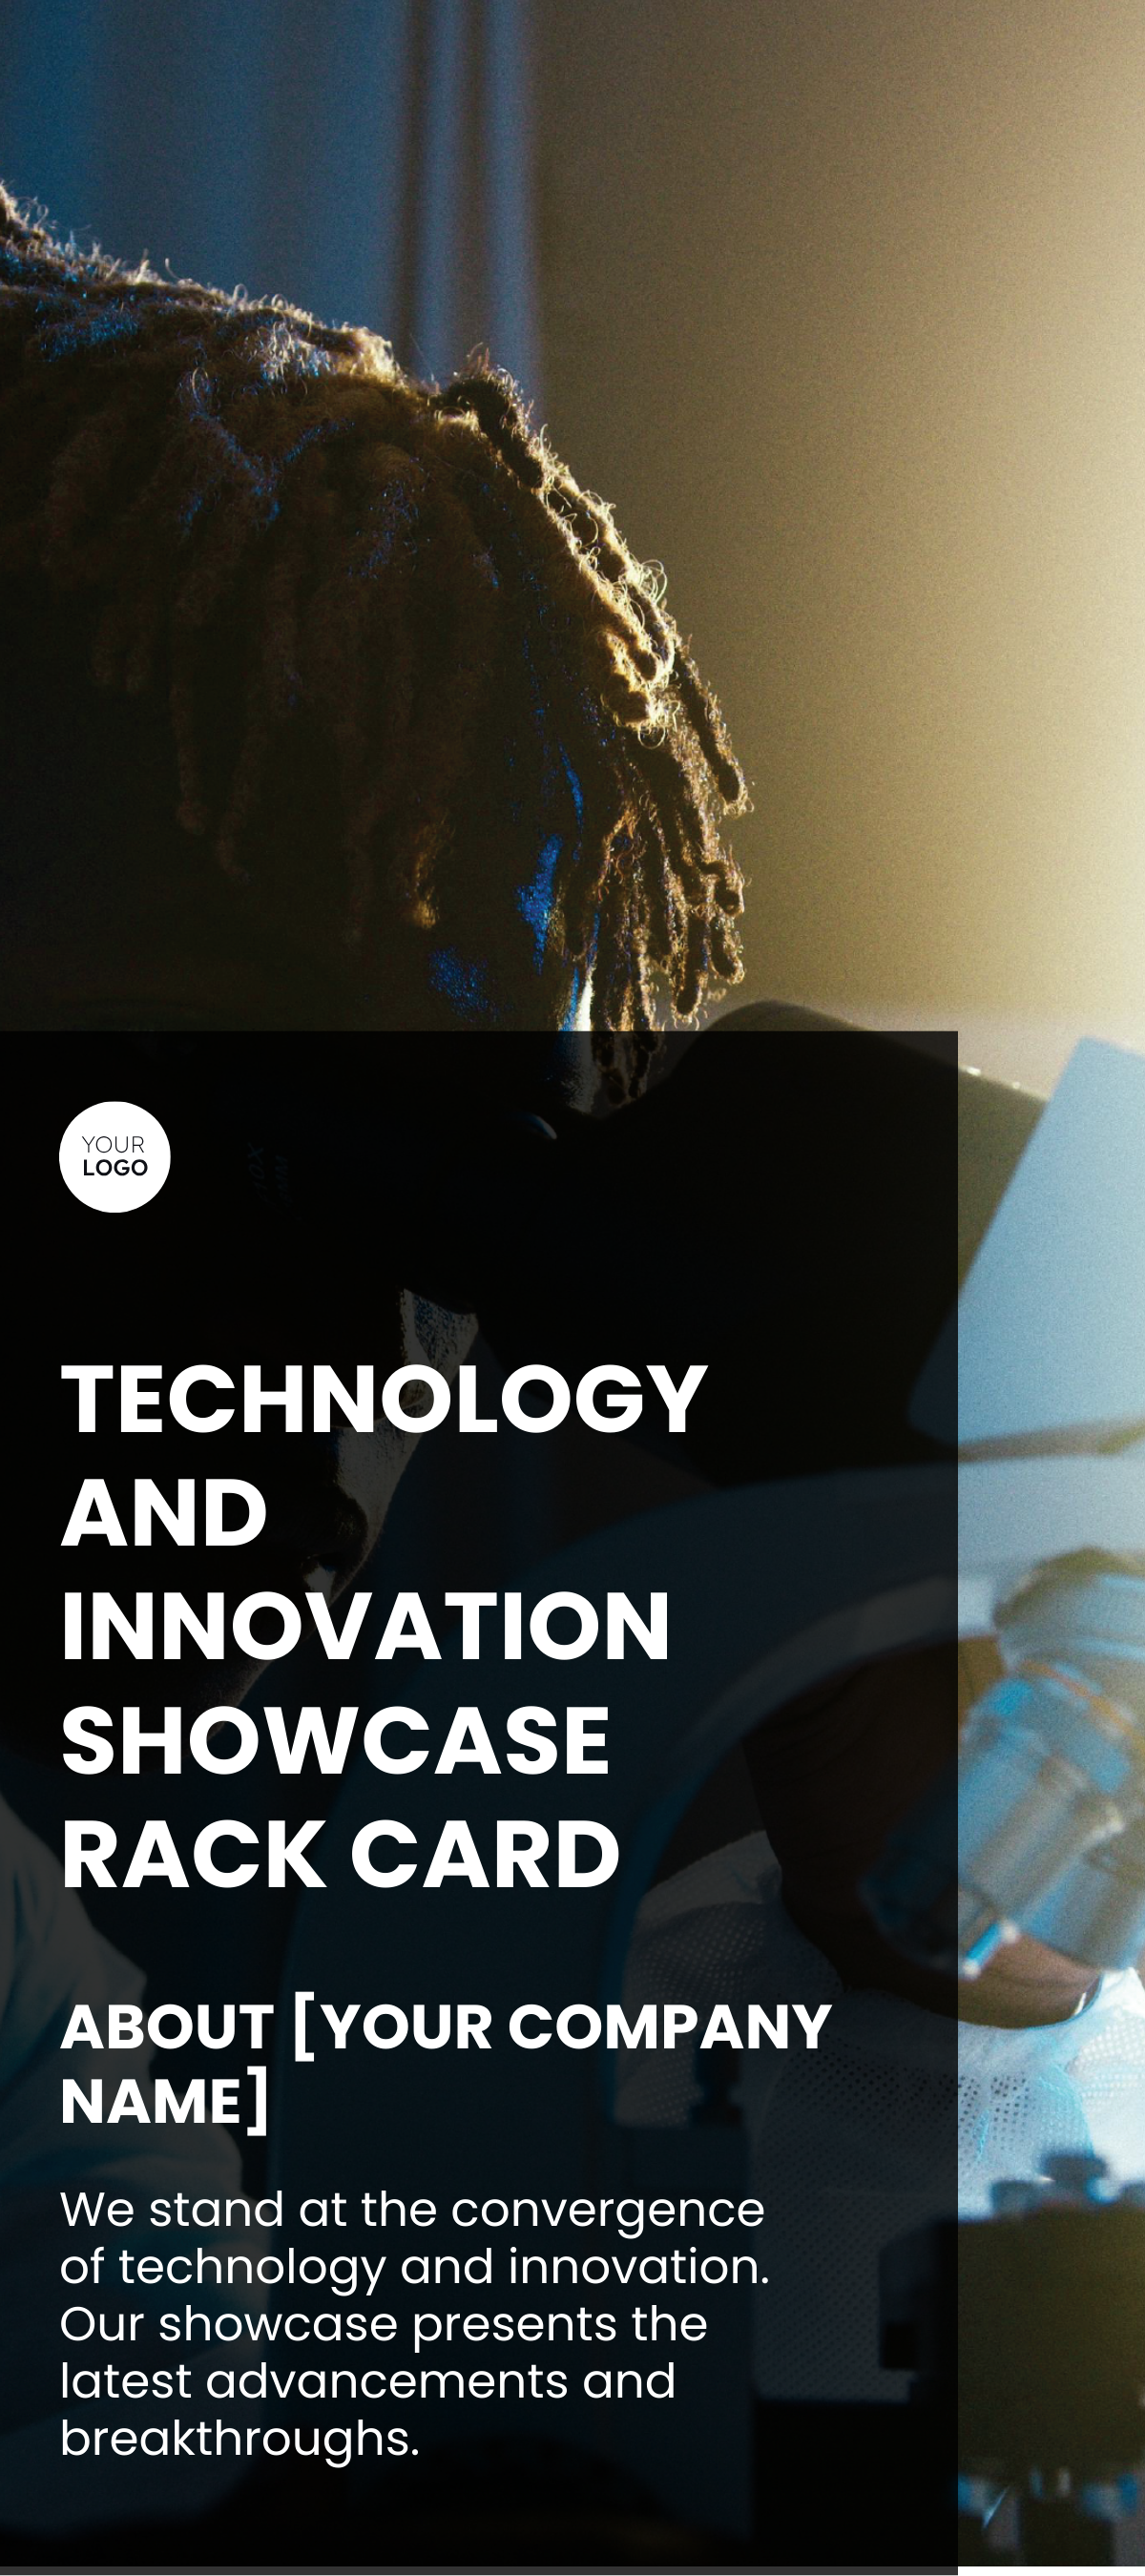 Technology and Innovation Showcase Rack Card